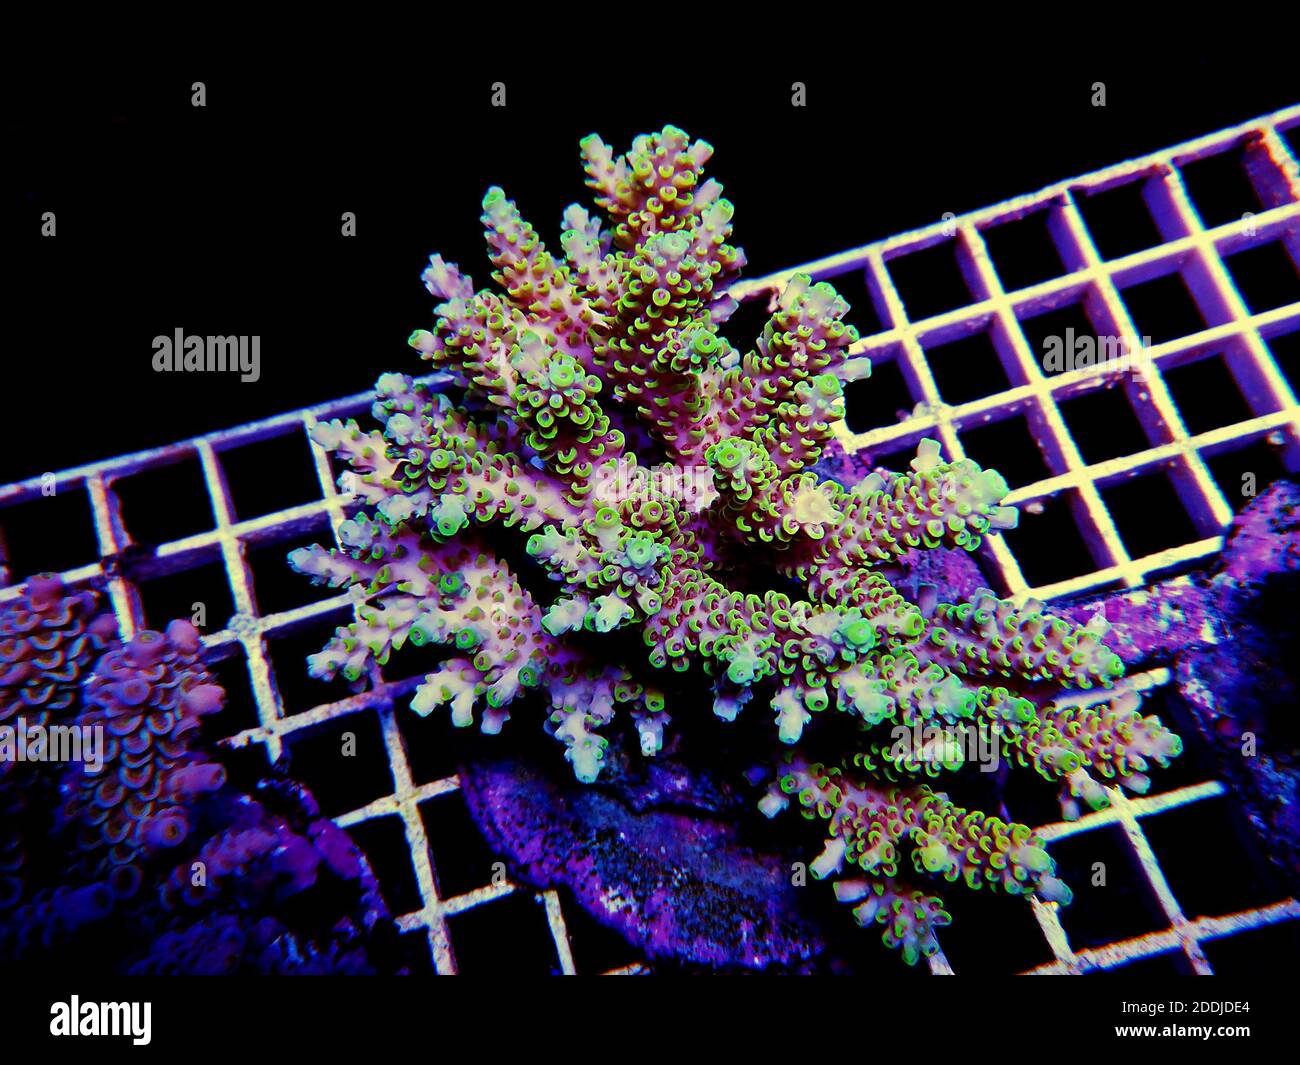 Isolated image of Acropora coral. Acropora is a genus of small polyp stony corals. Stock Photo